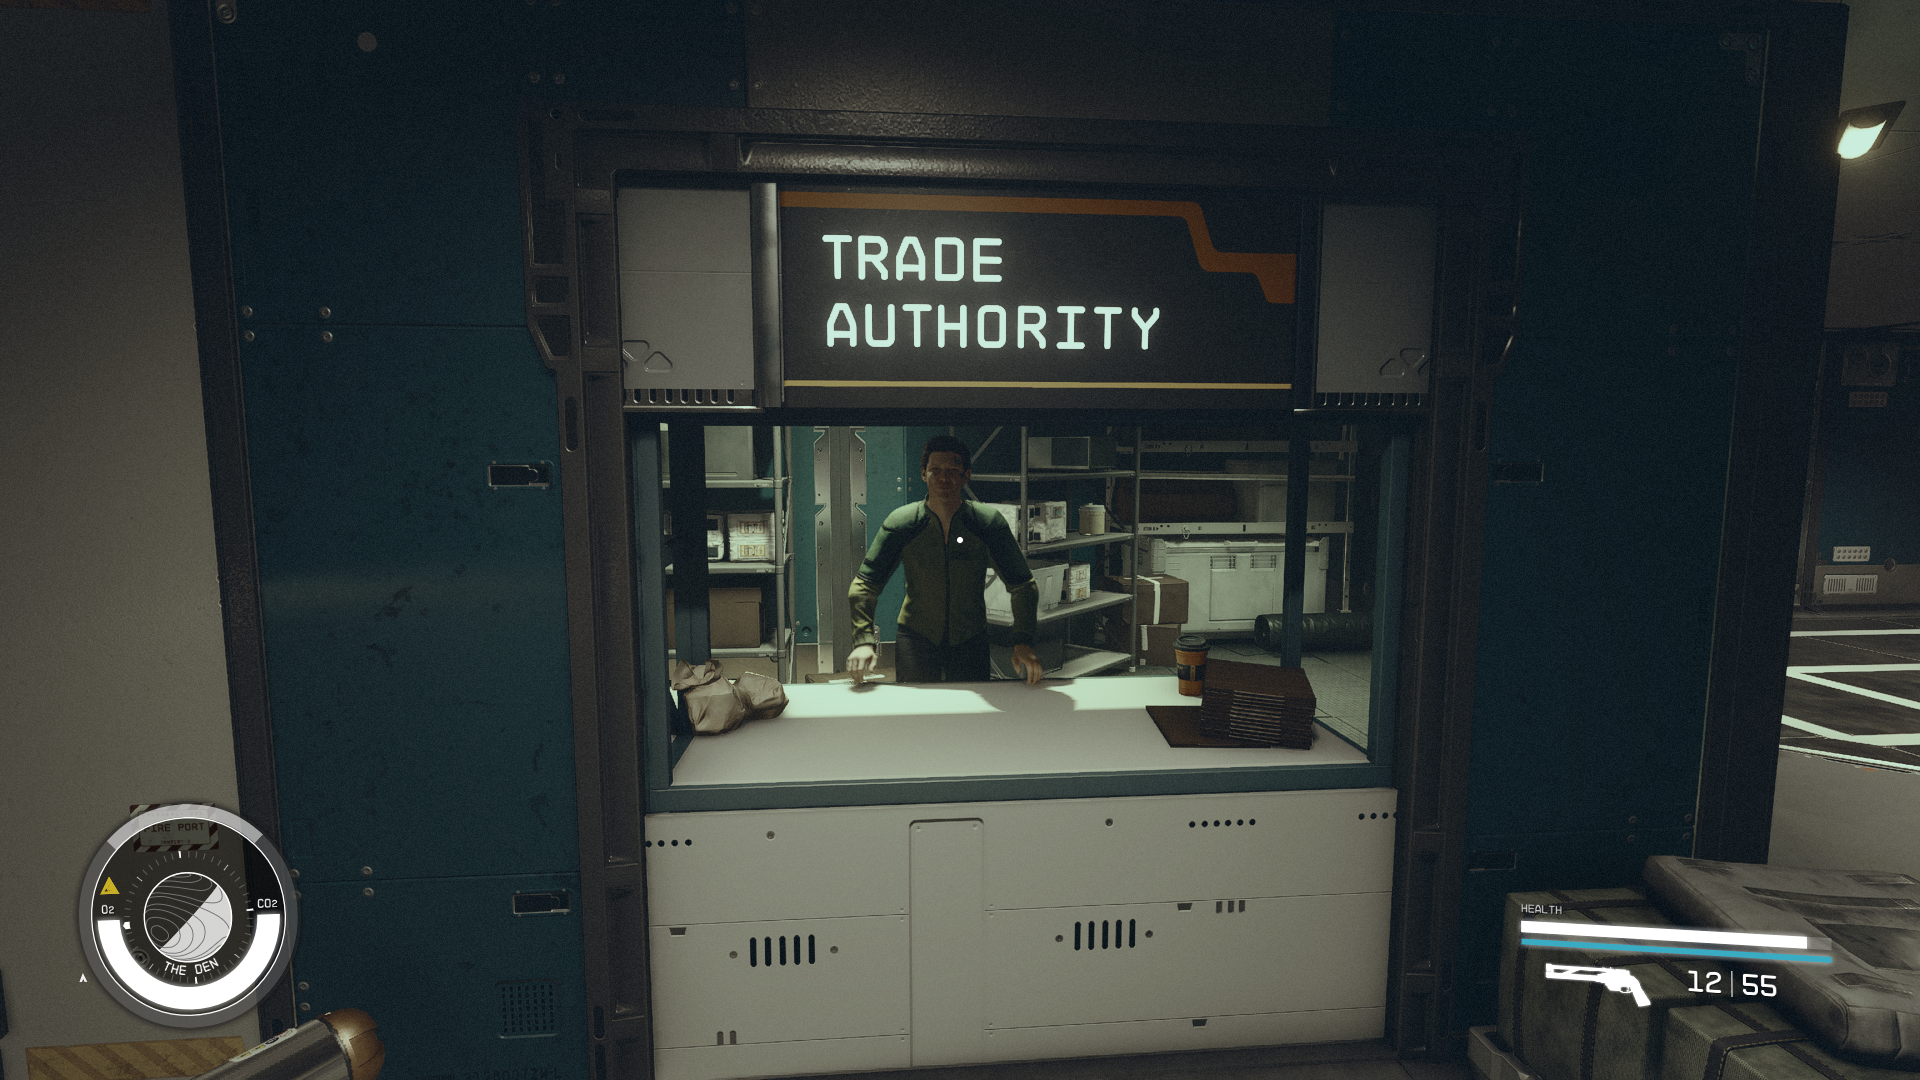 The Trade Authority store front in The Den in Starfield